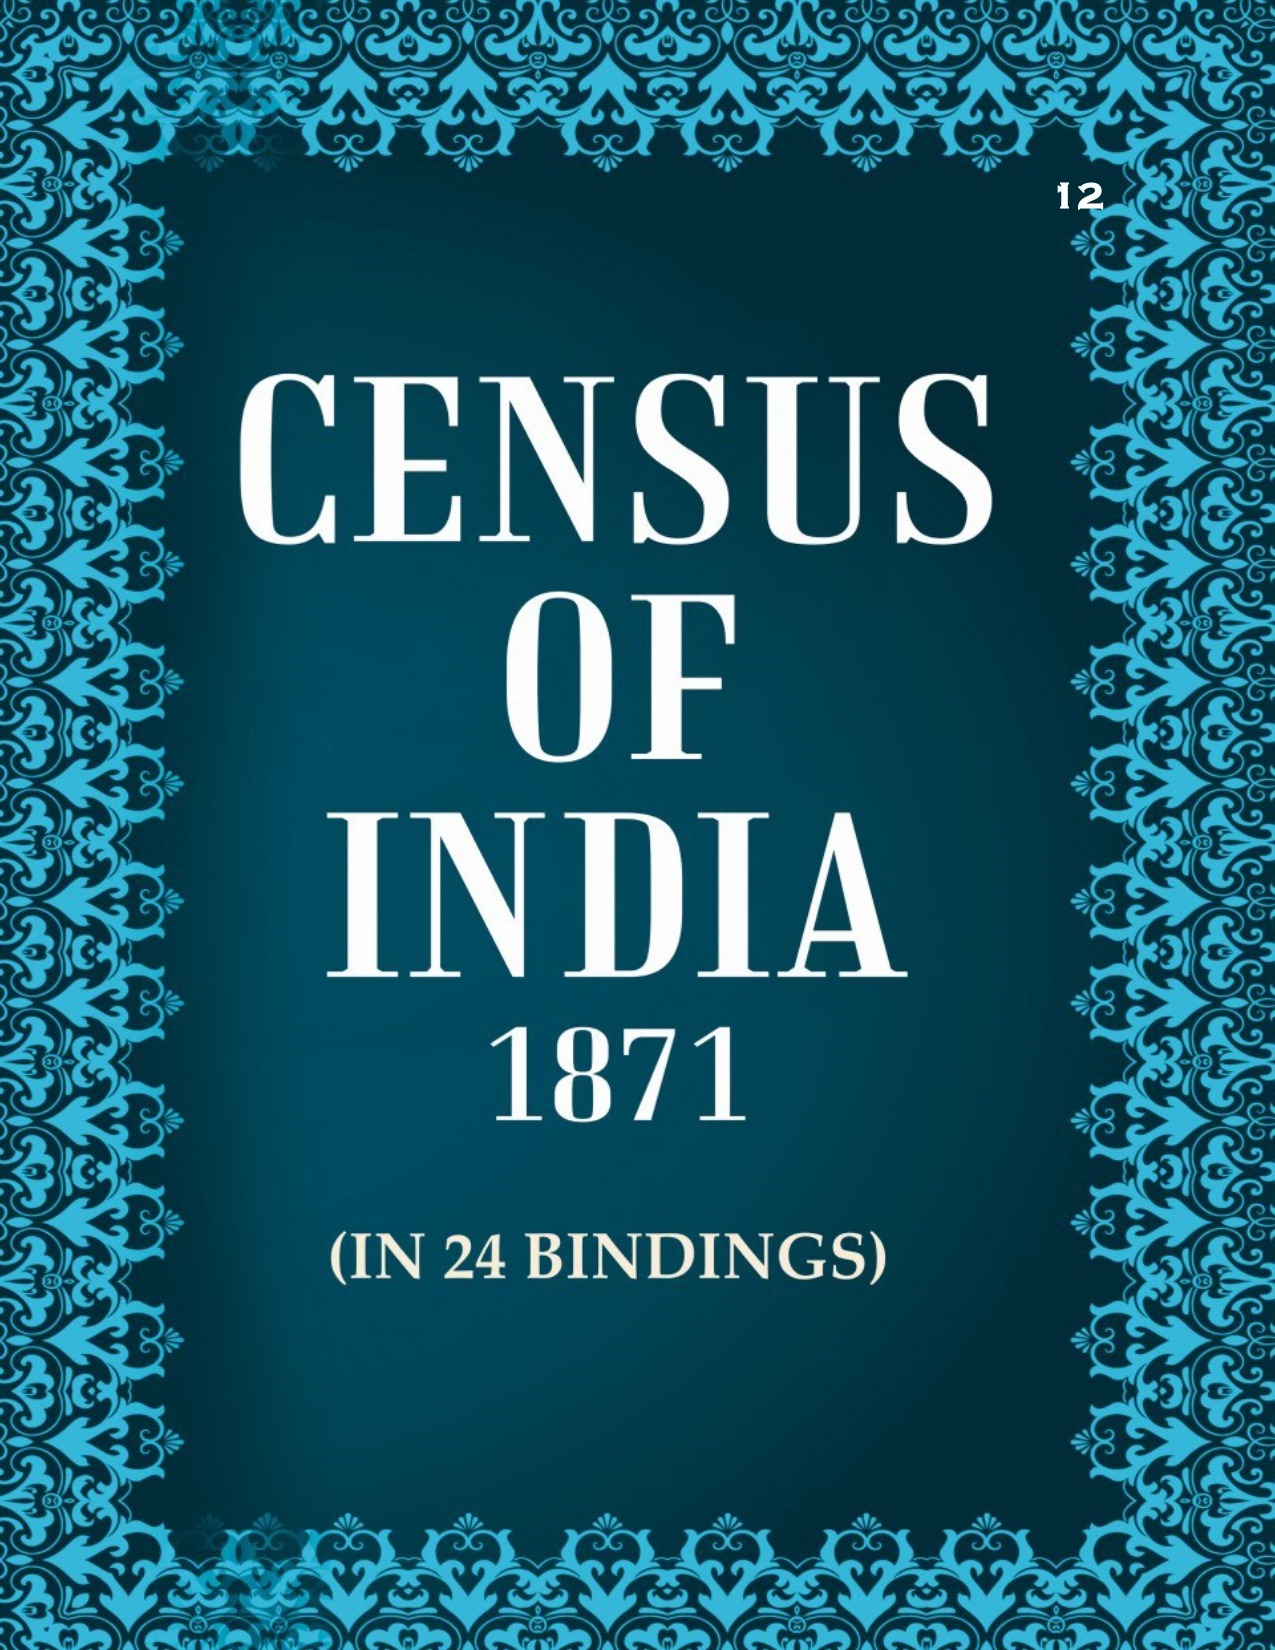 Census of India 1871: Report on The Coorg General Census of 1871 , With Appendices